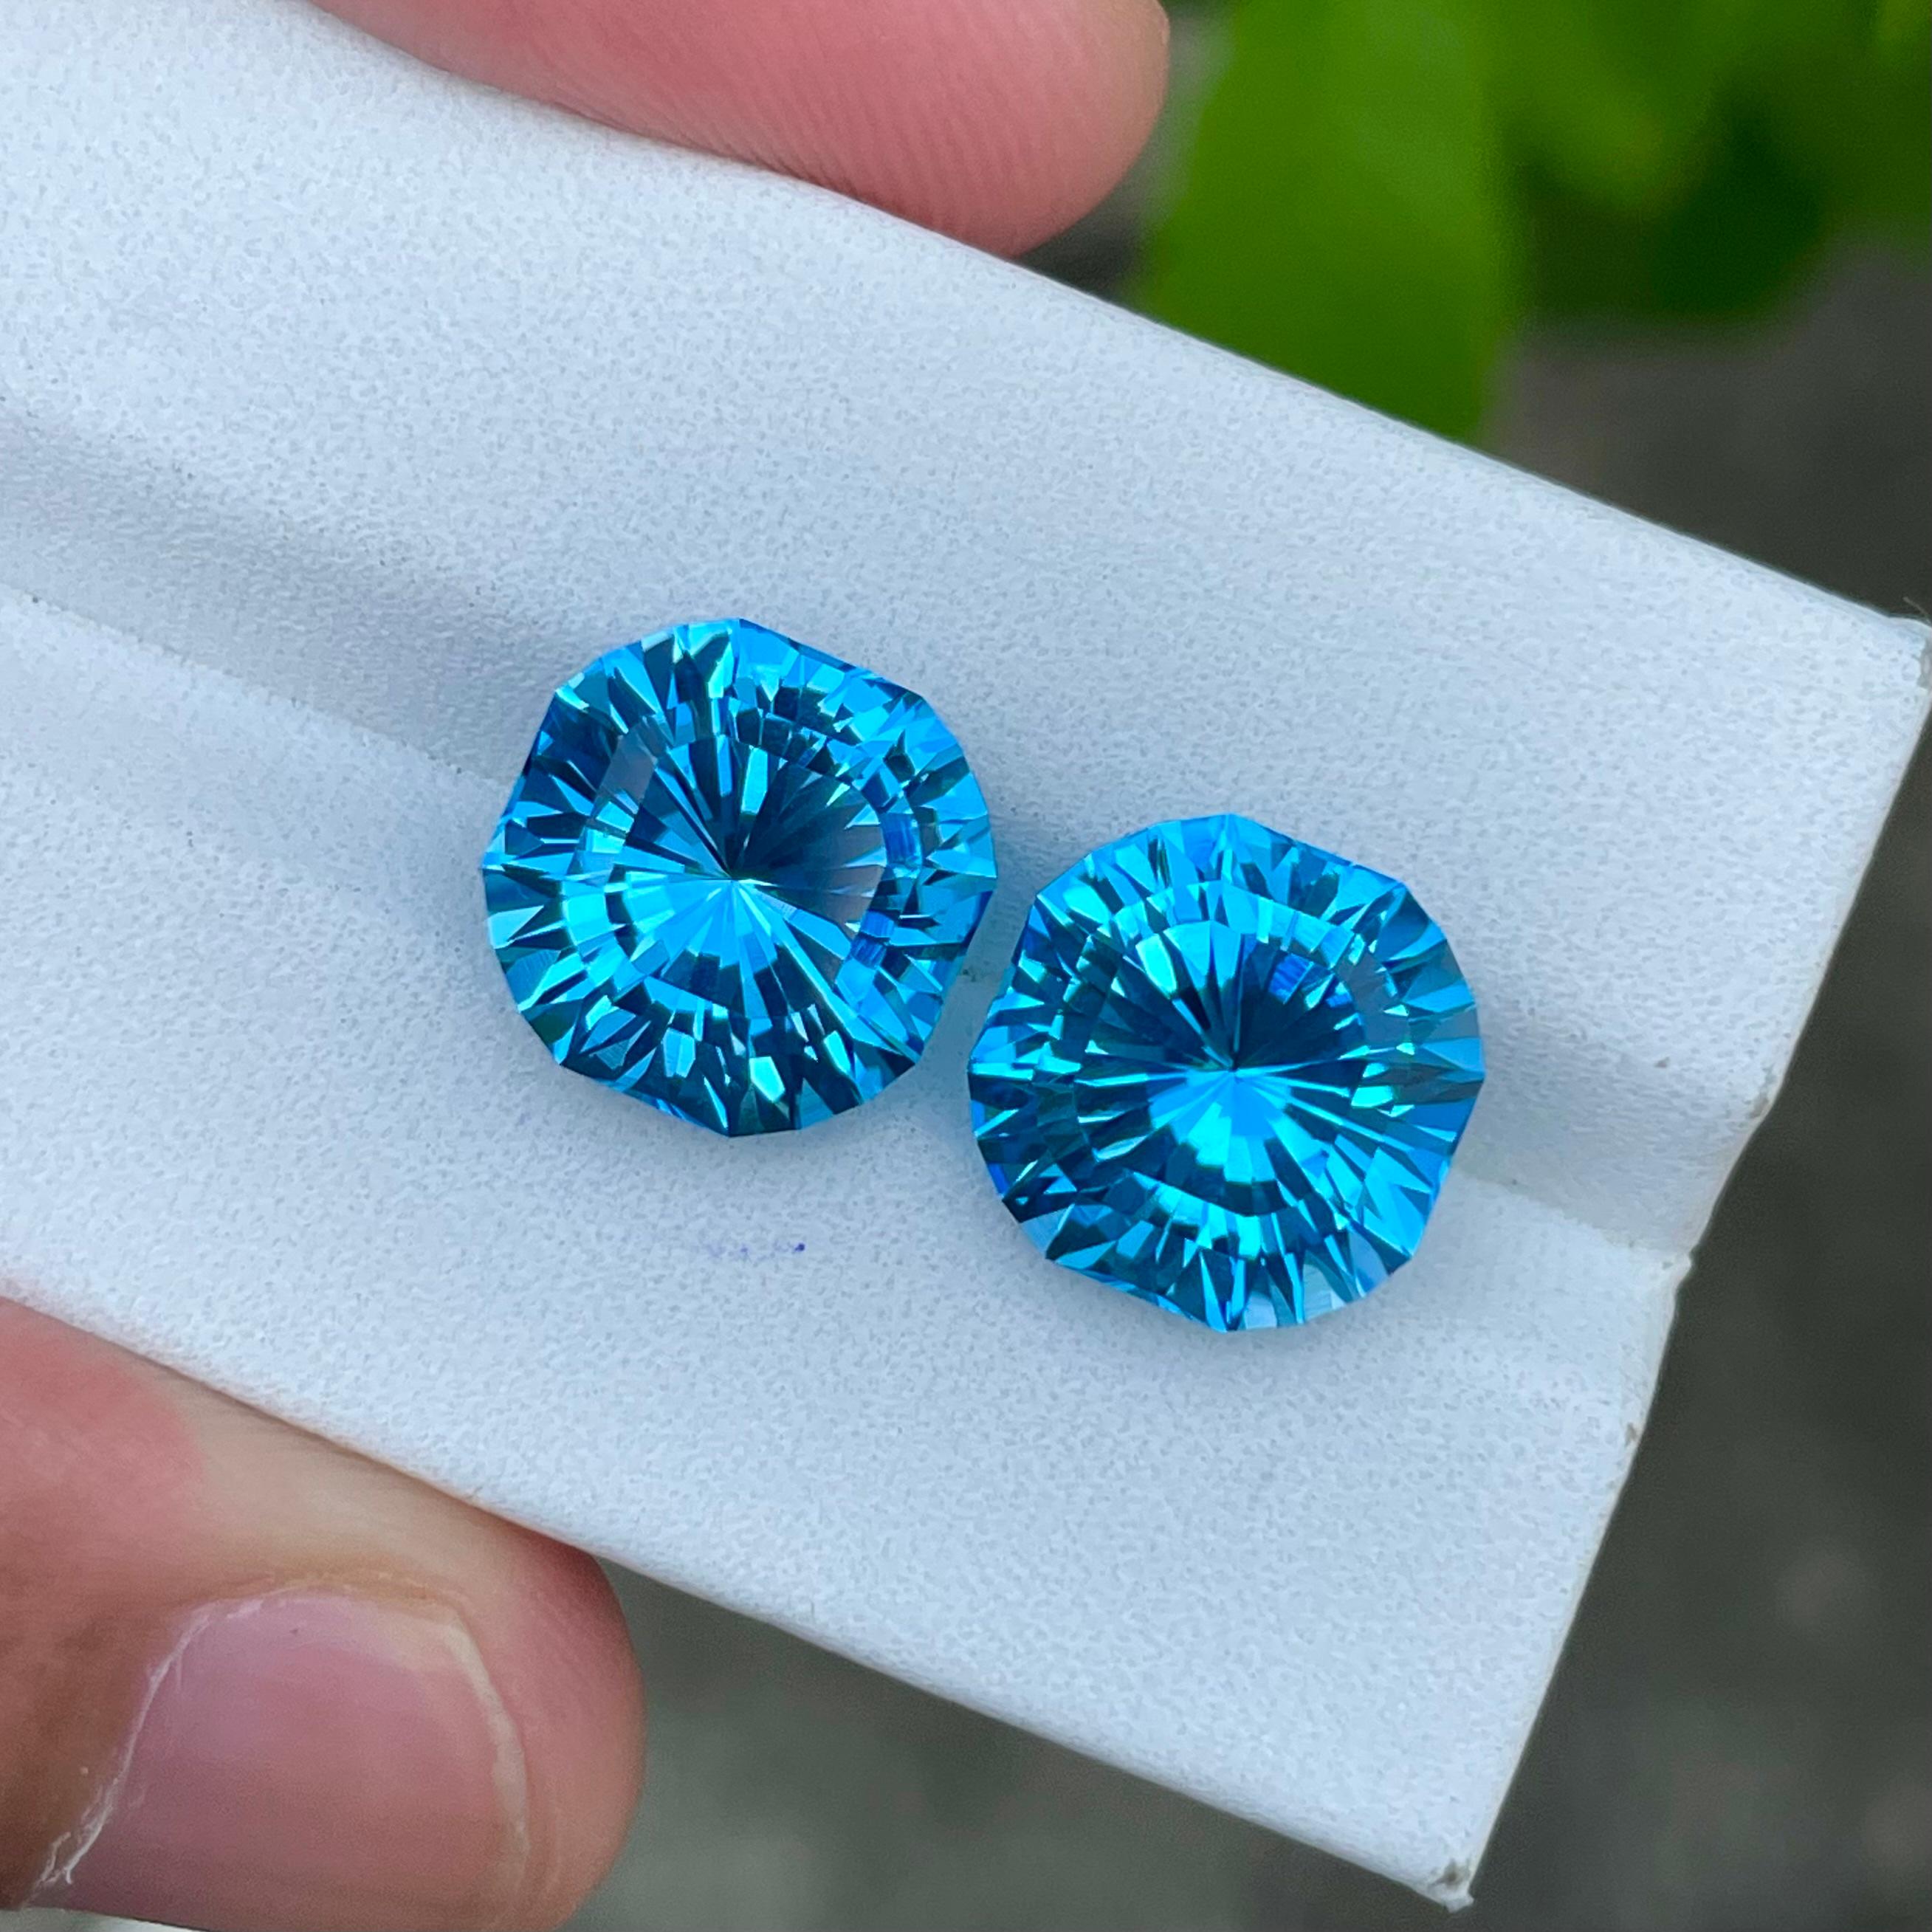 Weight 13.90 carats 
Dimensions 11.2 x 11.2 x 7.7 mm
Treatment Heated 
Origin Madagascar 
Clarity Loupe Clean 
Shape Octagon 
Cut Custom Precision 



Elevate your jewelry collection with this exquisite pair of Fancy Cut Neon Blue Topaz gemstones,